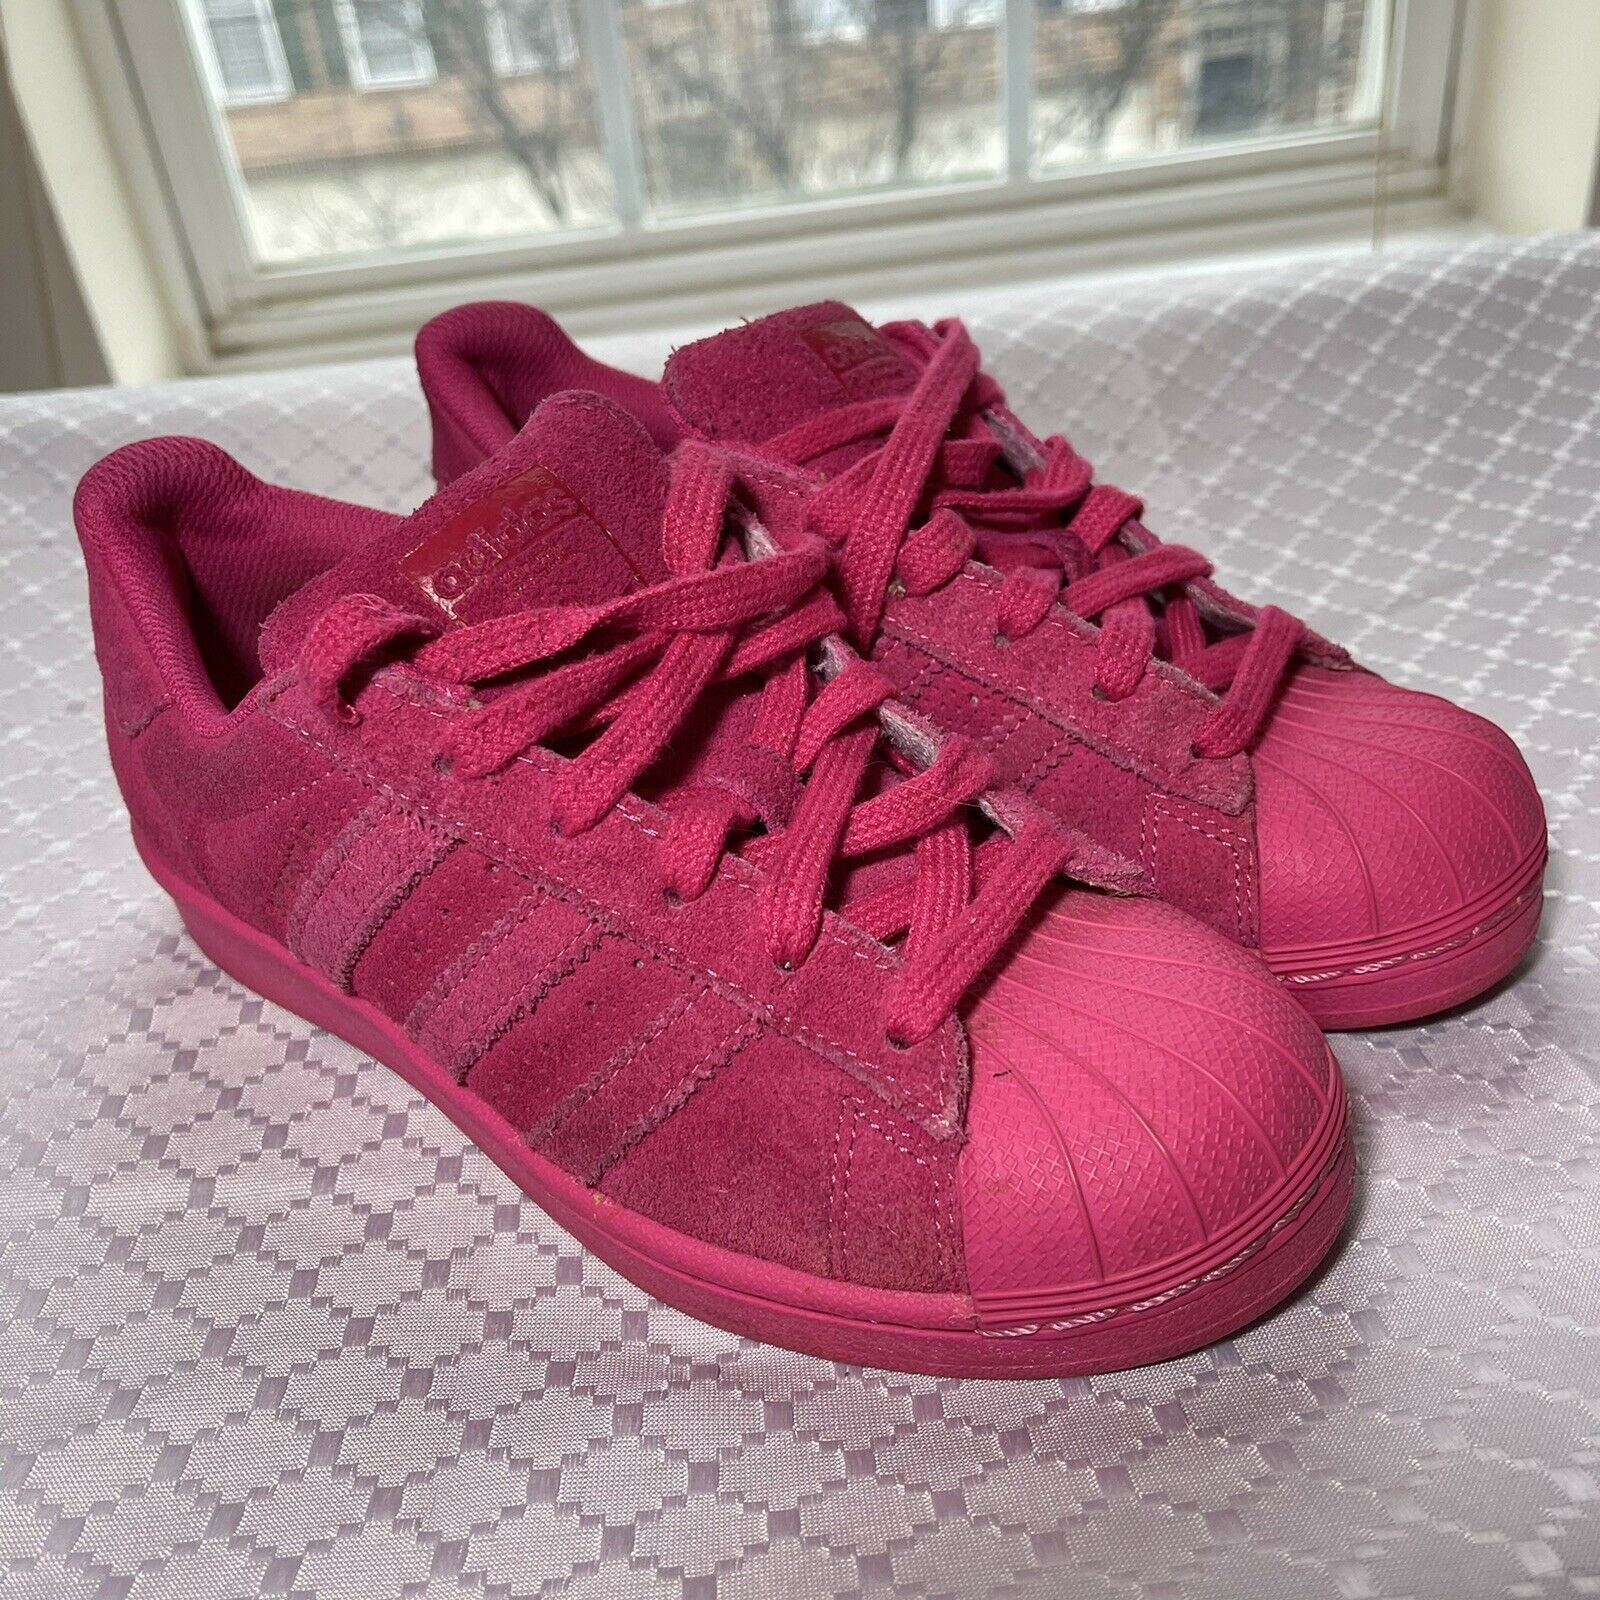 Adidas Superstar Suede J 'Mono Pink' Shell Toe women's size 3.5 sneakers AQ4170 - £18.16 GBP